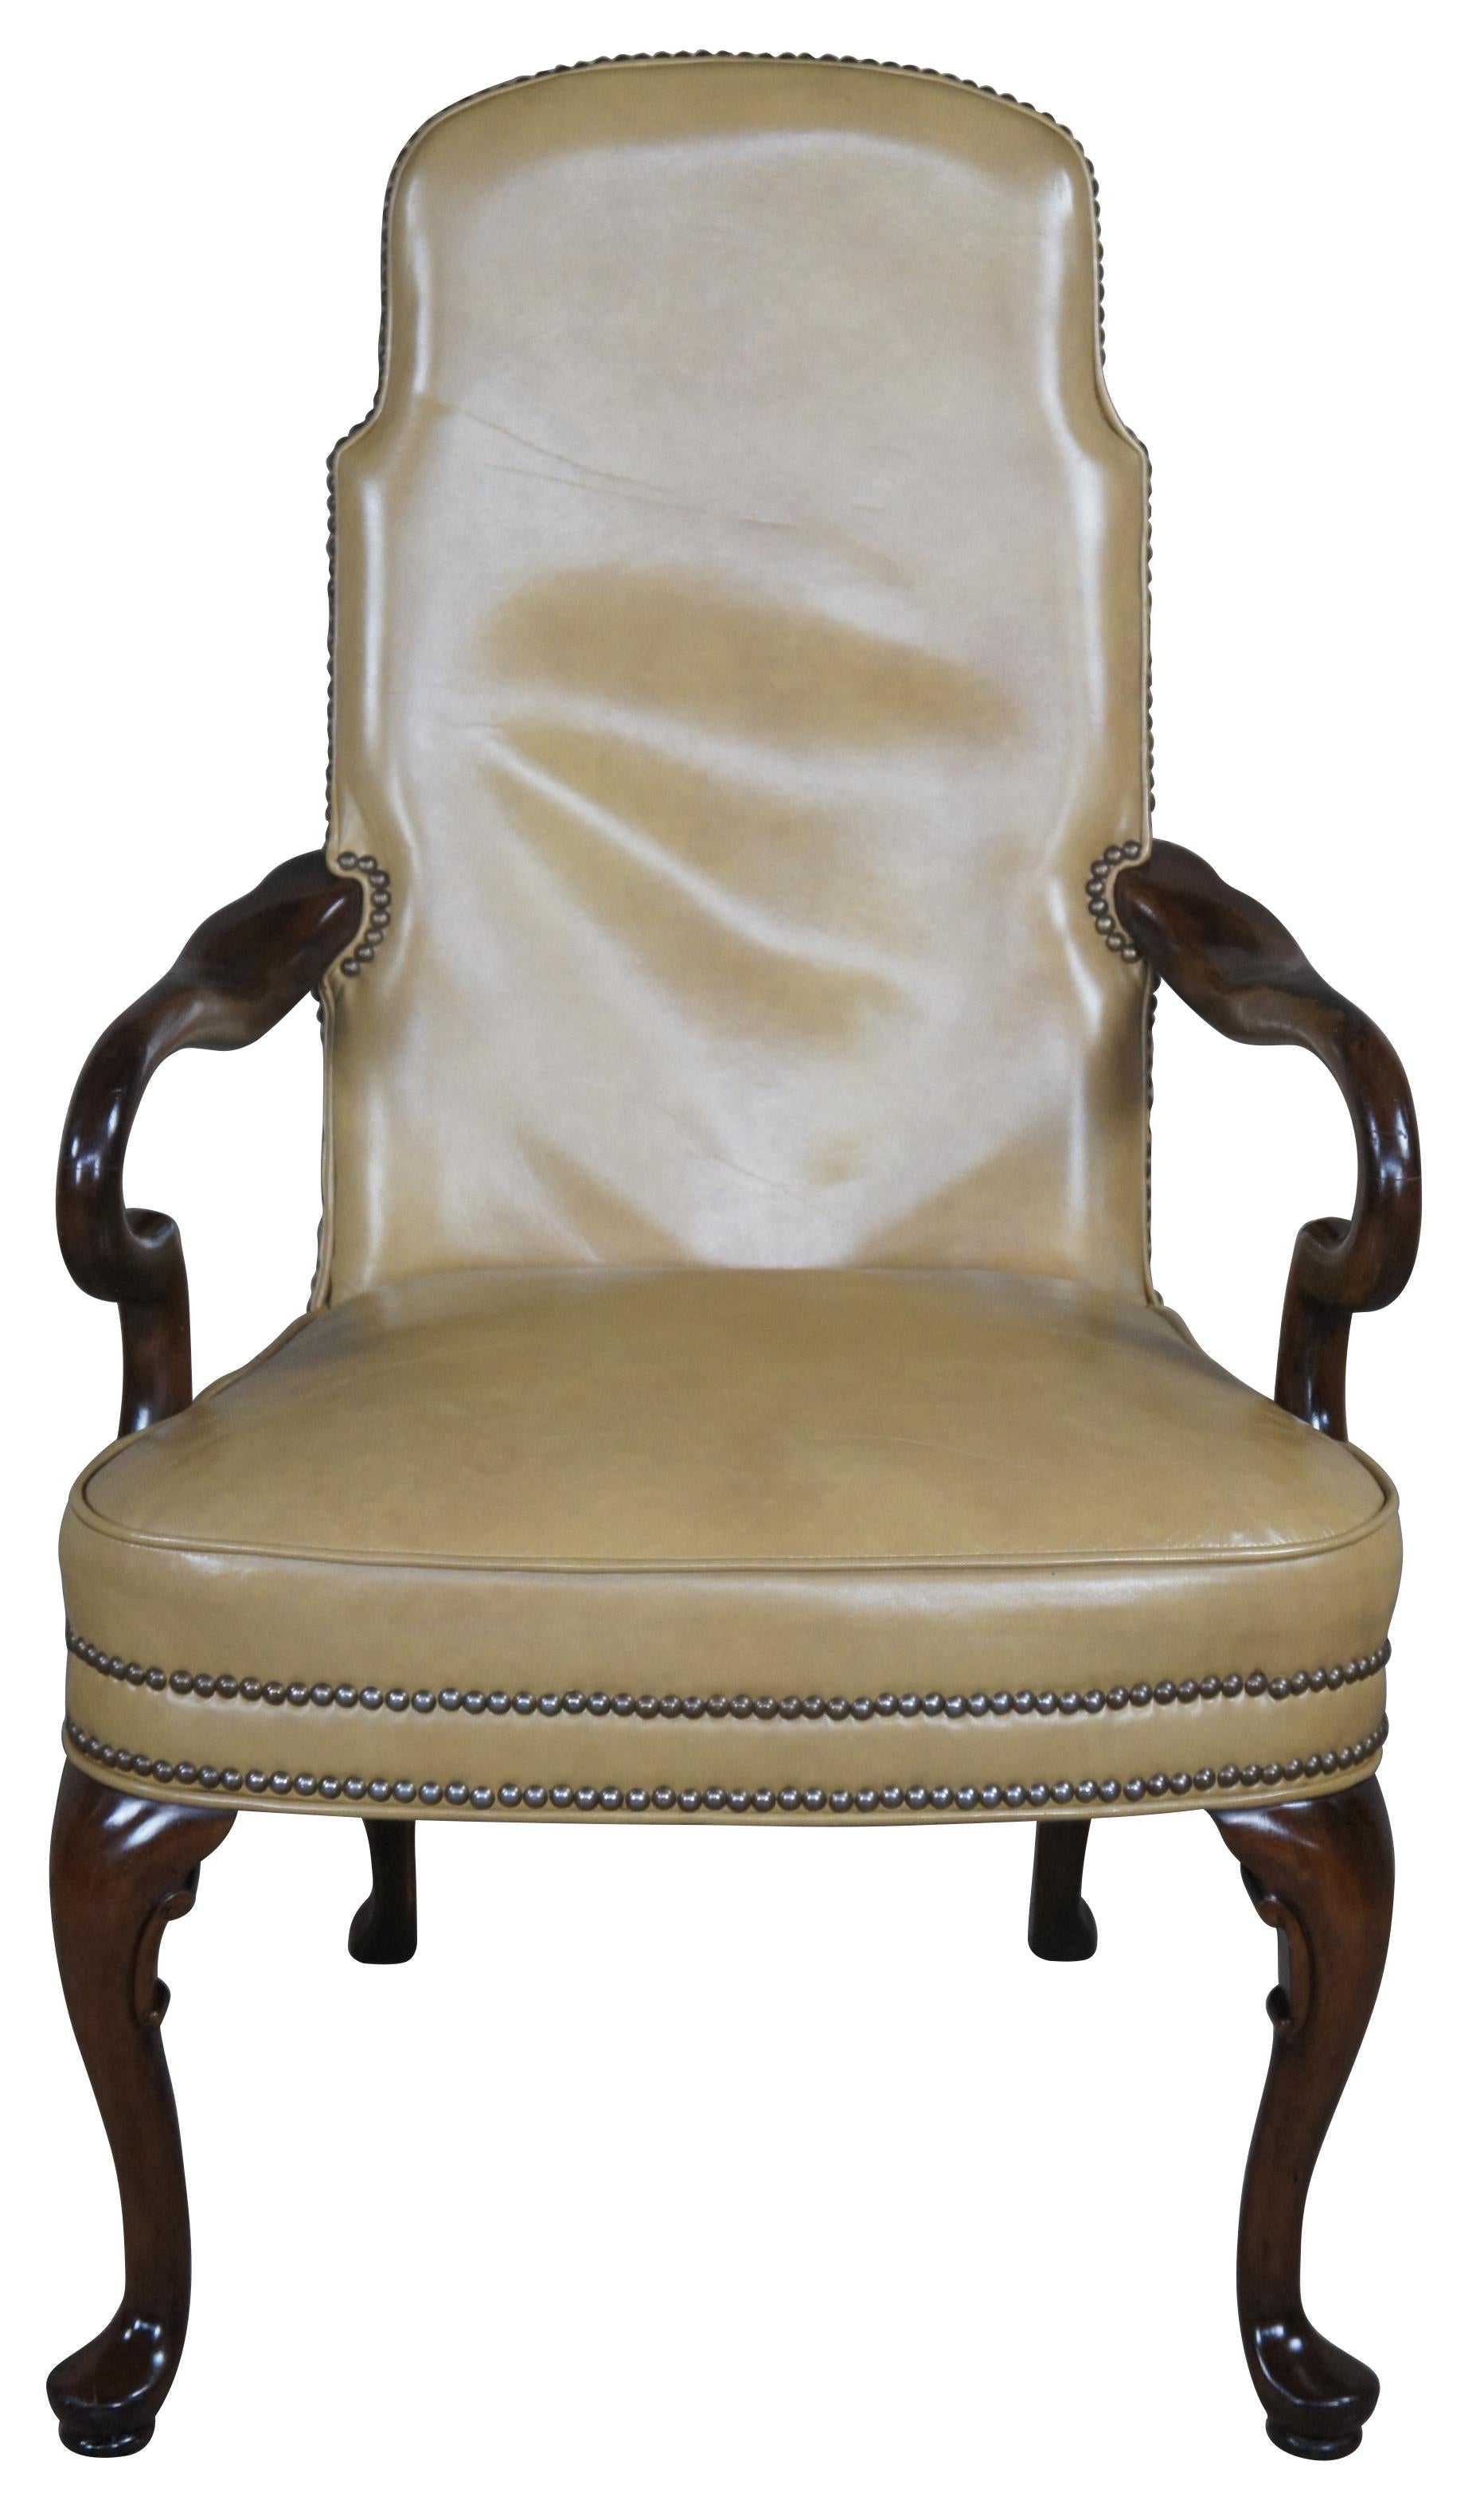 ethan allen dining chairs vintage